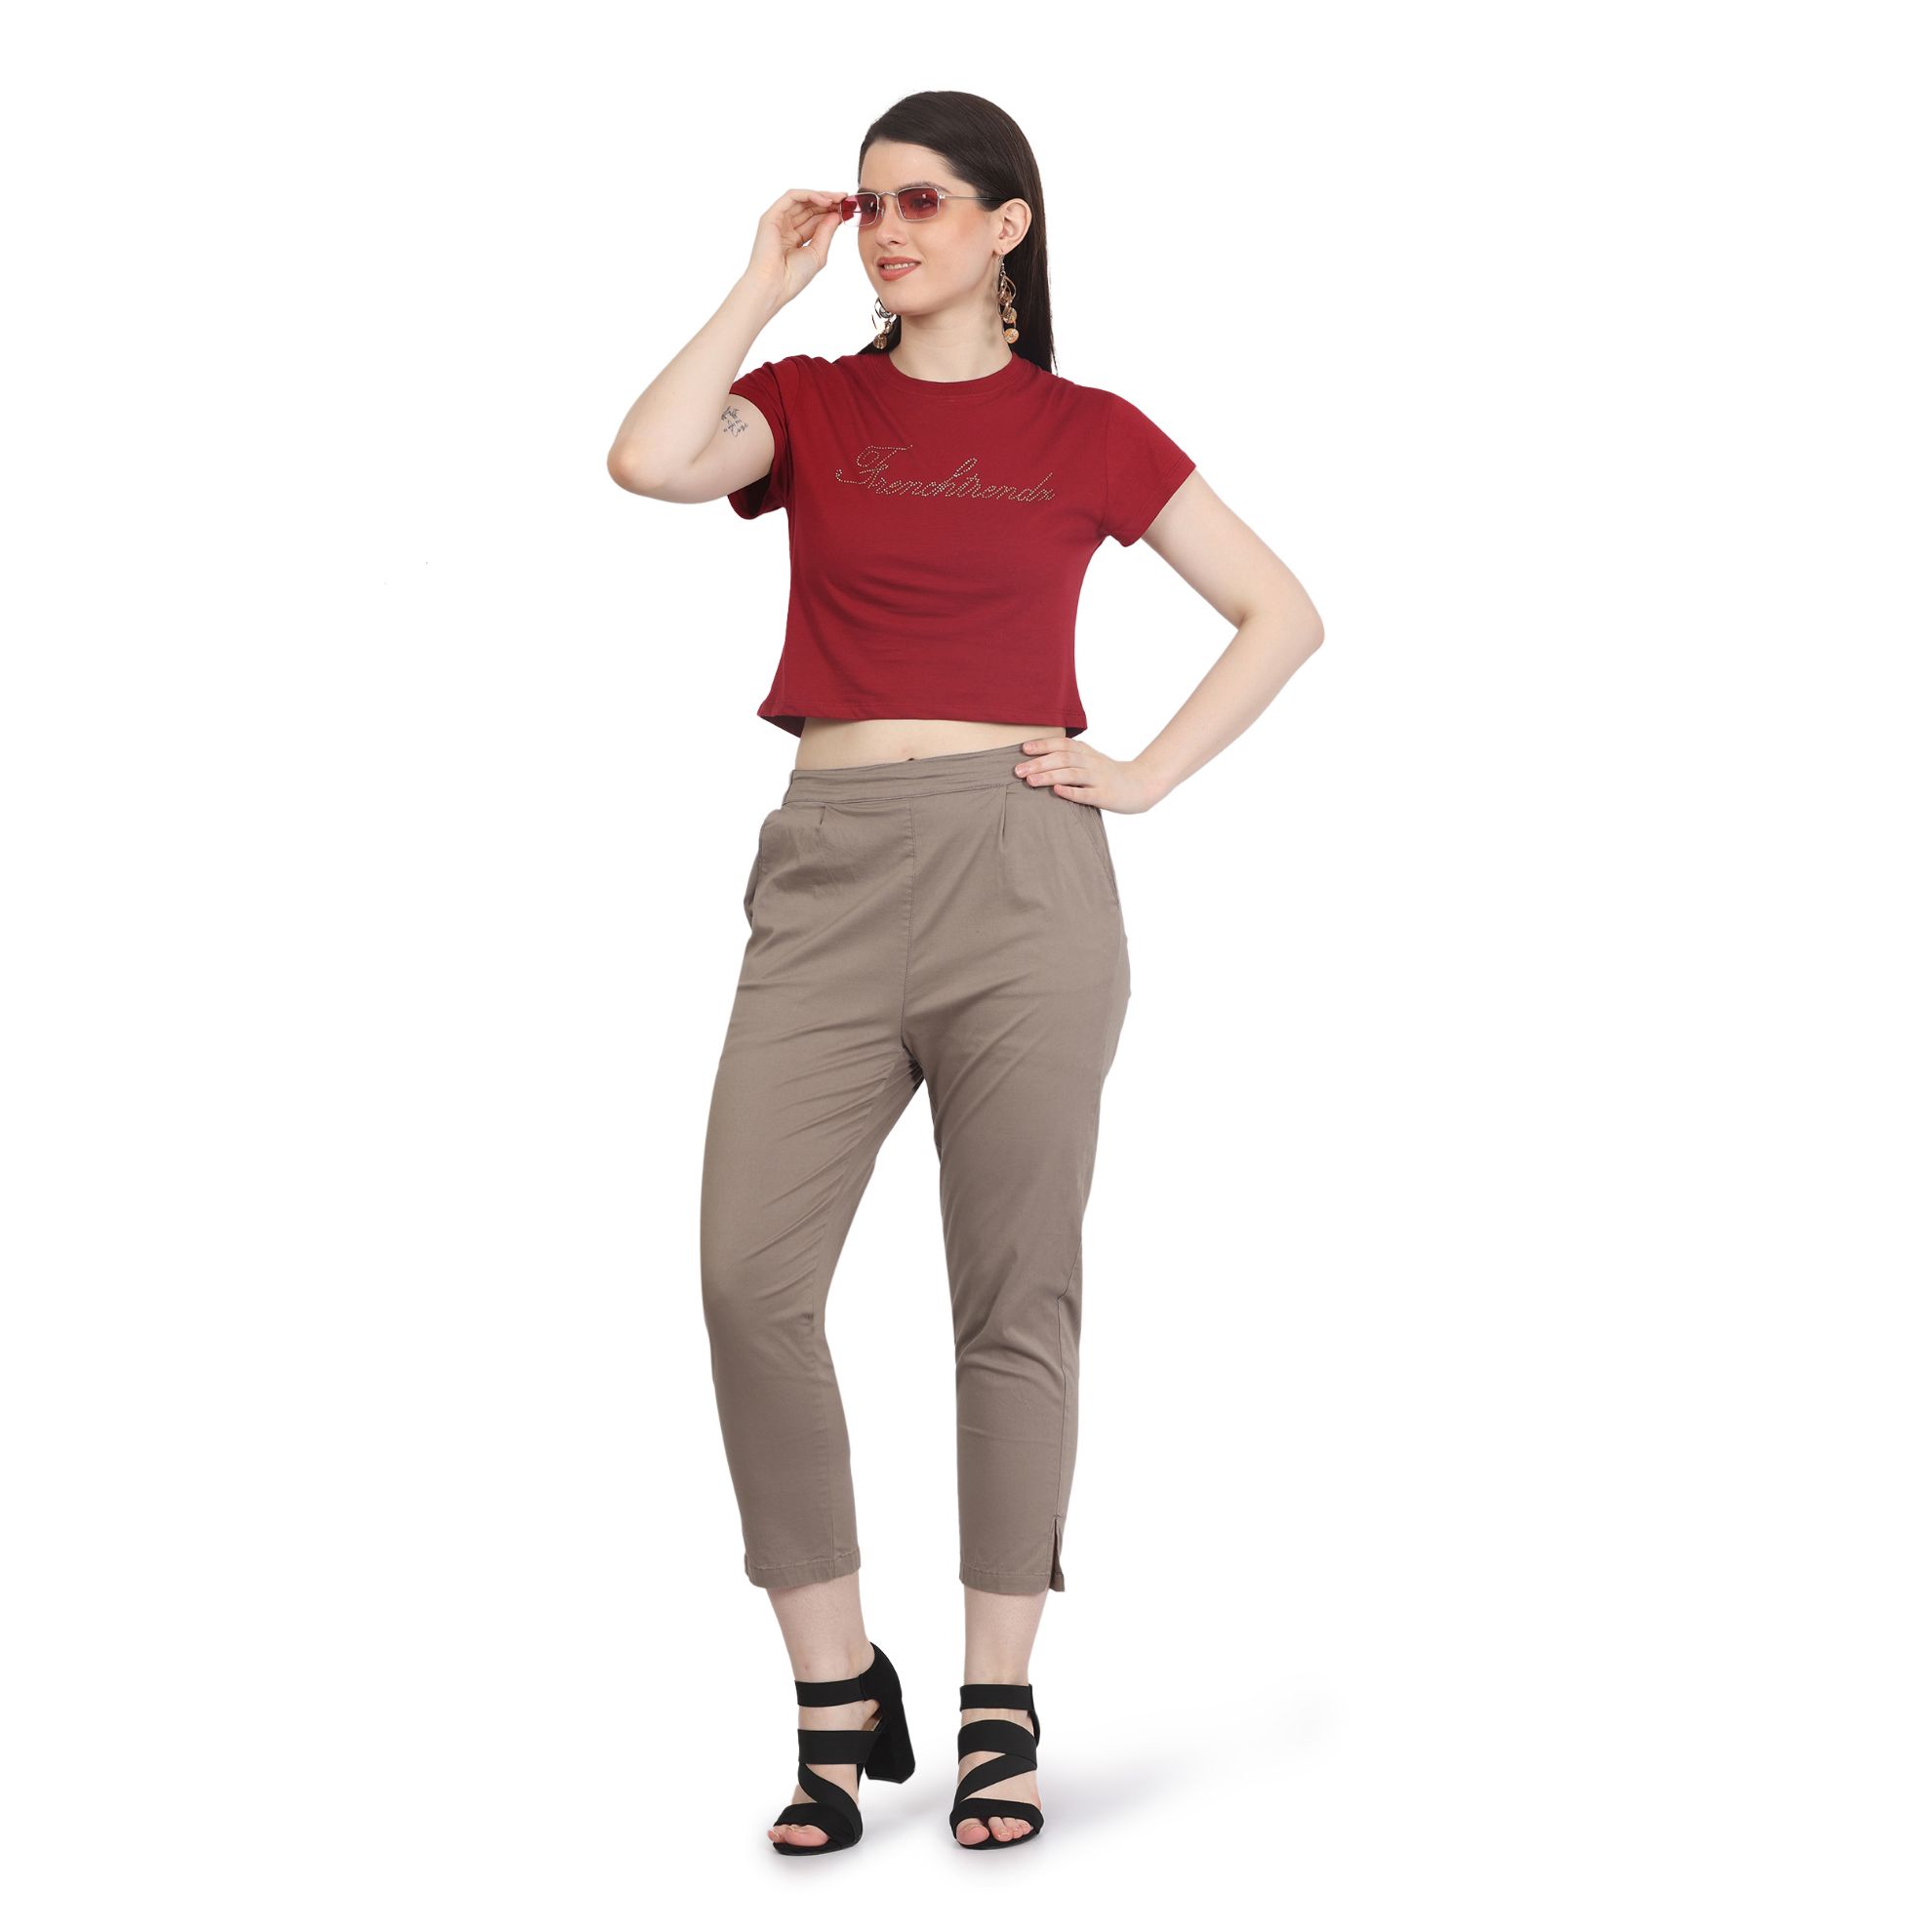 GO COLORS Shiny Pant M (Copper) in Nizamabad at best price by Go Colors -  Justdial